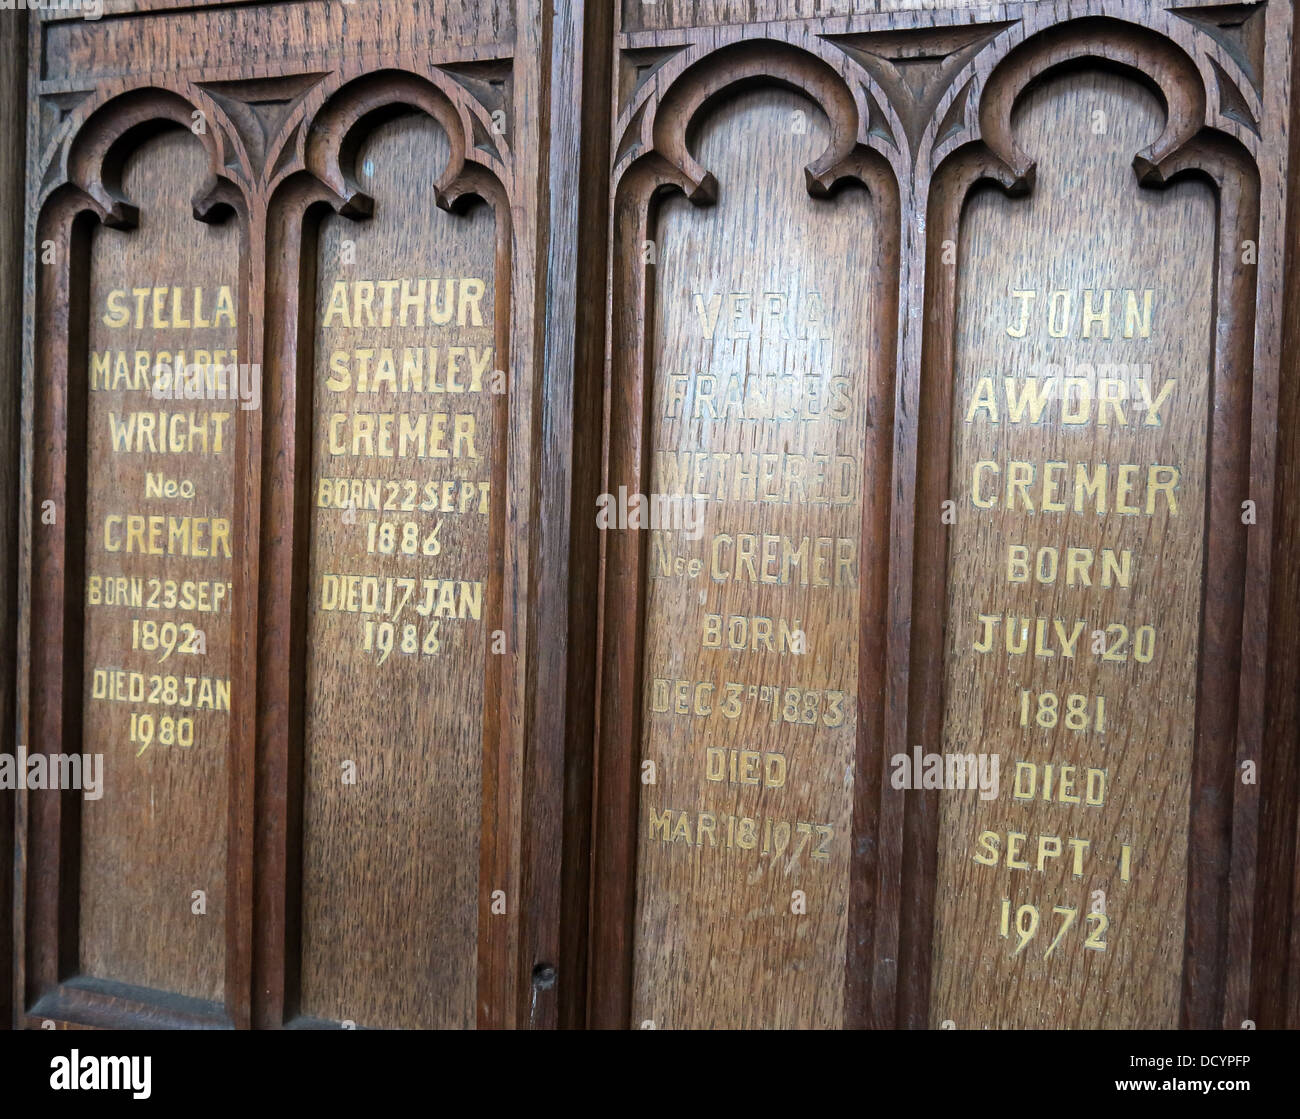 Arthur Stanley Cremer Wood Panels,Lacock Abbey,Lacock,Wiltshire, England, SN15 Stock Photo